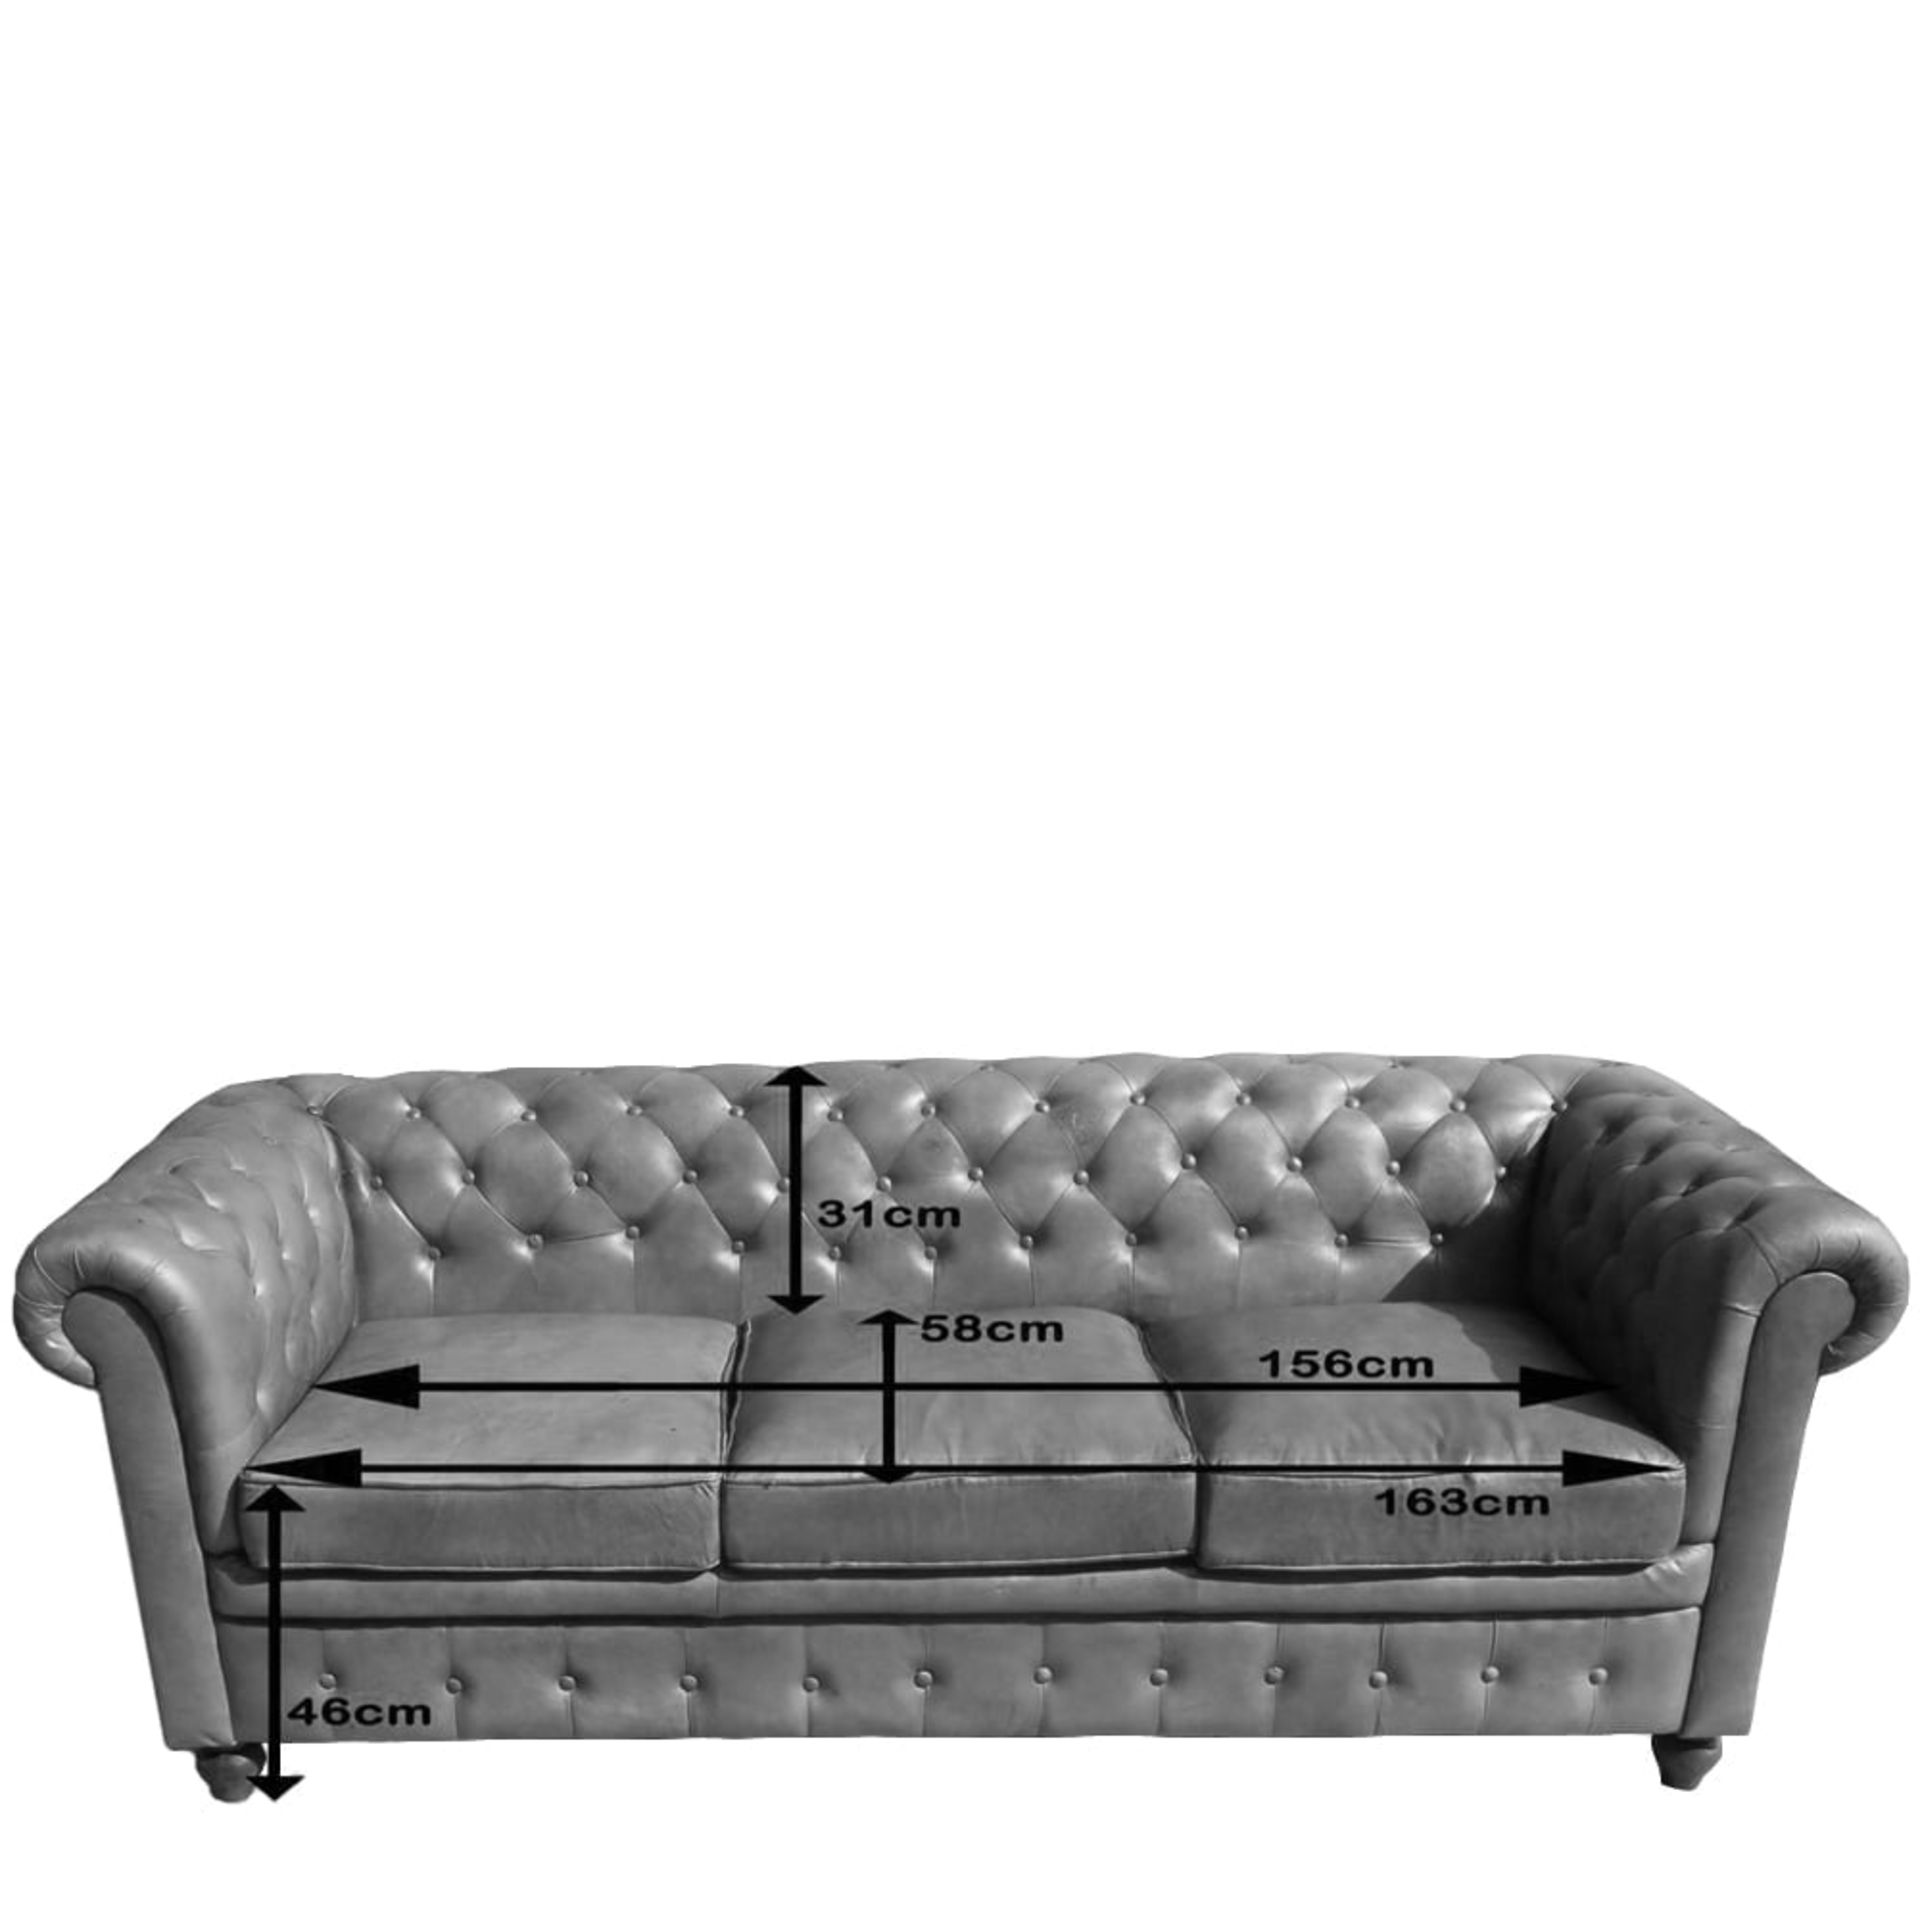 Shoreditch Leather Chesterfield 3-Seater Sofa Handmade - Image 3 of 3